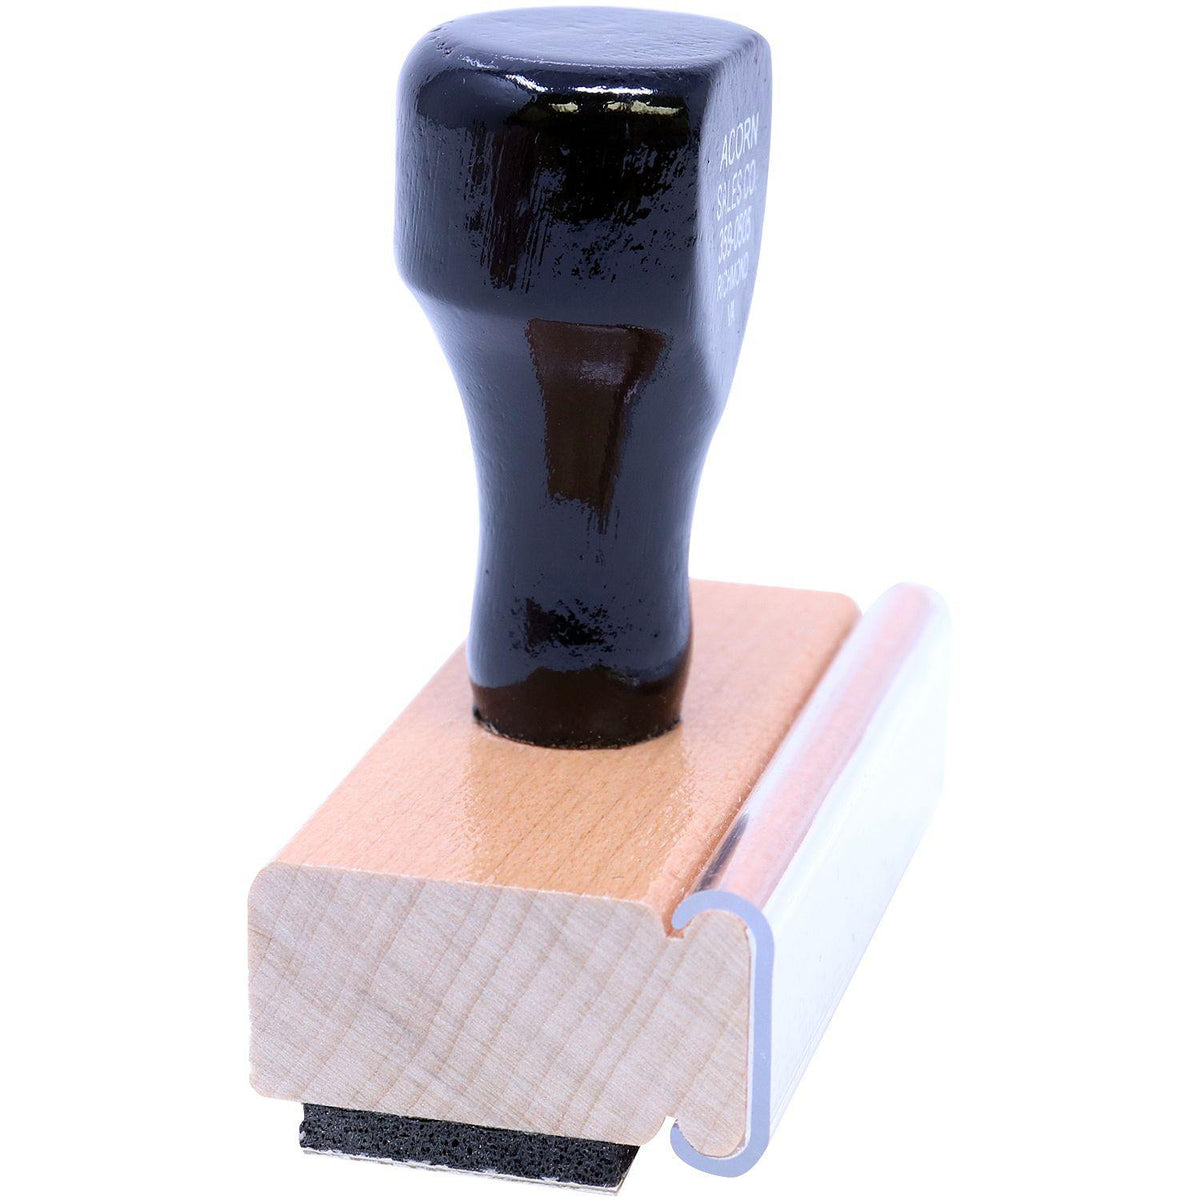 Side View of Large Rush with Rabbit Rubber Stamp at an Angle